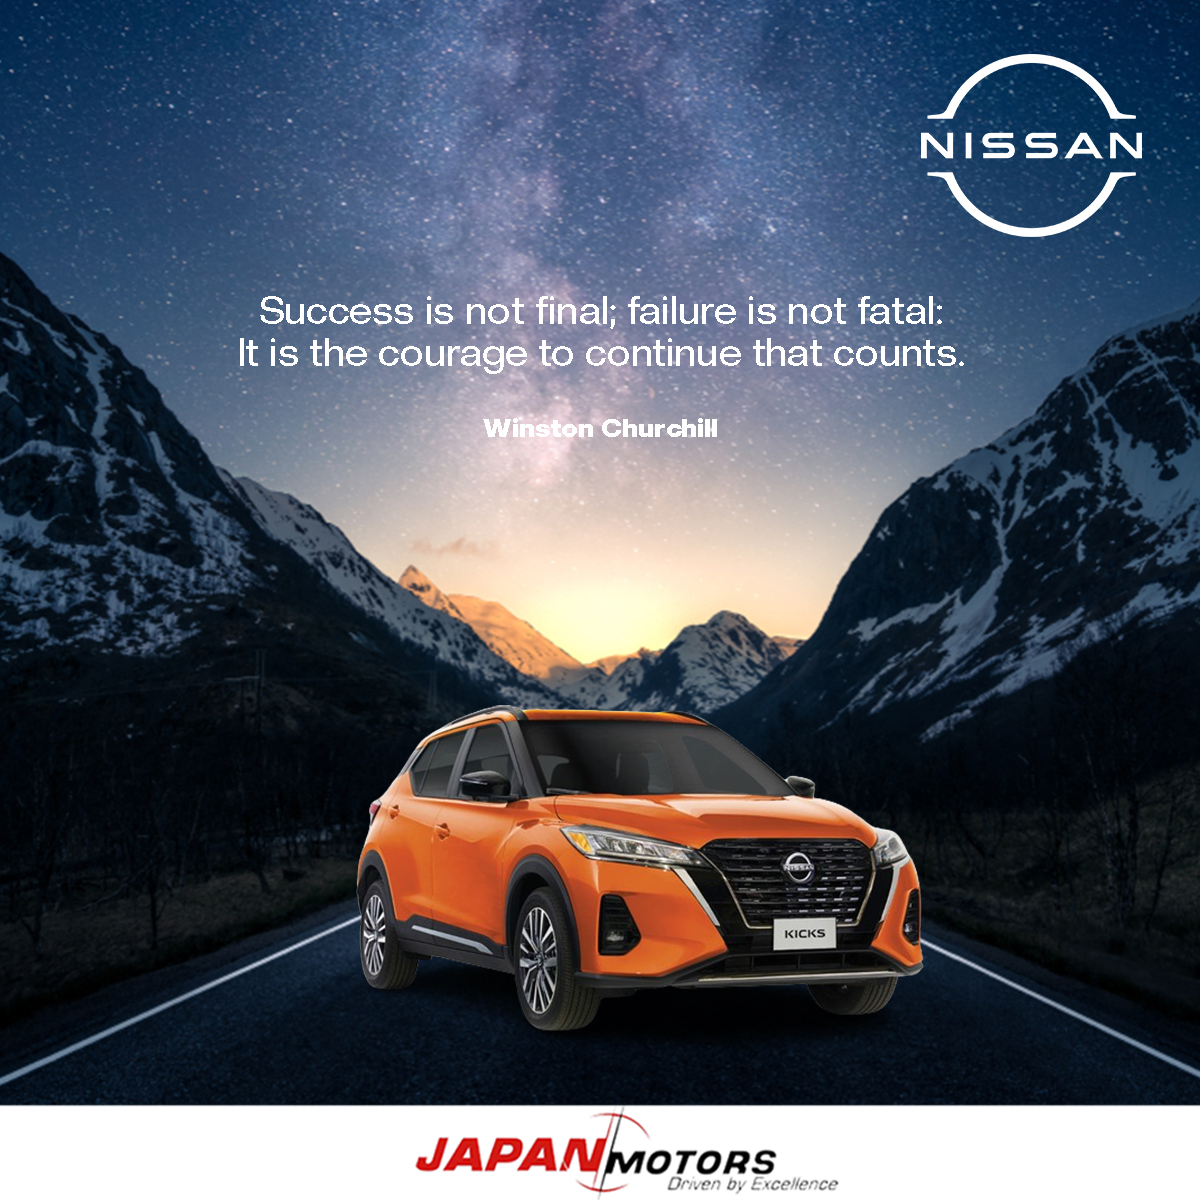 Success is not final; failure is not fatal: It is the courage to continue that counts. - Winston Churchill Call our hotline📞:0244338393 #JapanMotors #NissanGhana #SolidarityForever #Nissan #NissanRoadTripReady #OffRoad #SUV #NissanLove #JapanMotors #NissanGhana